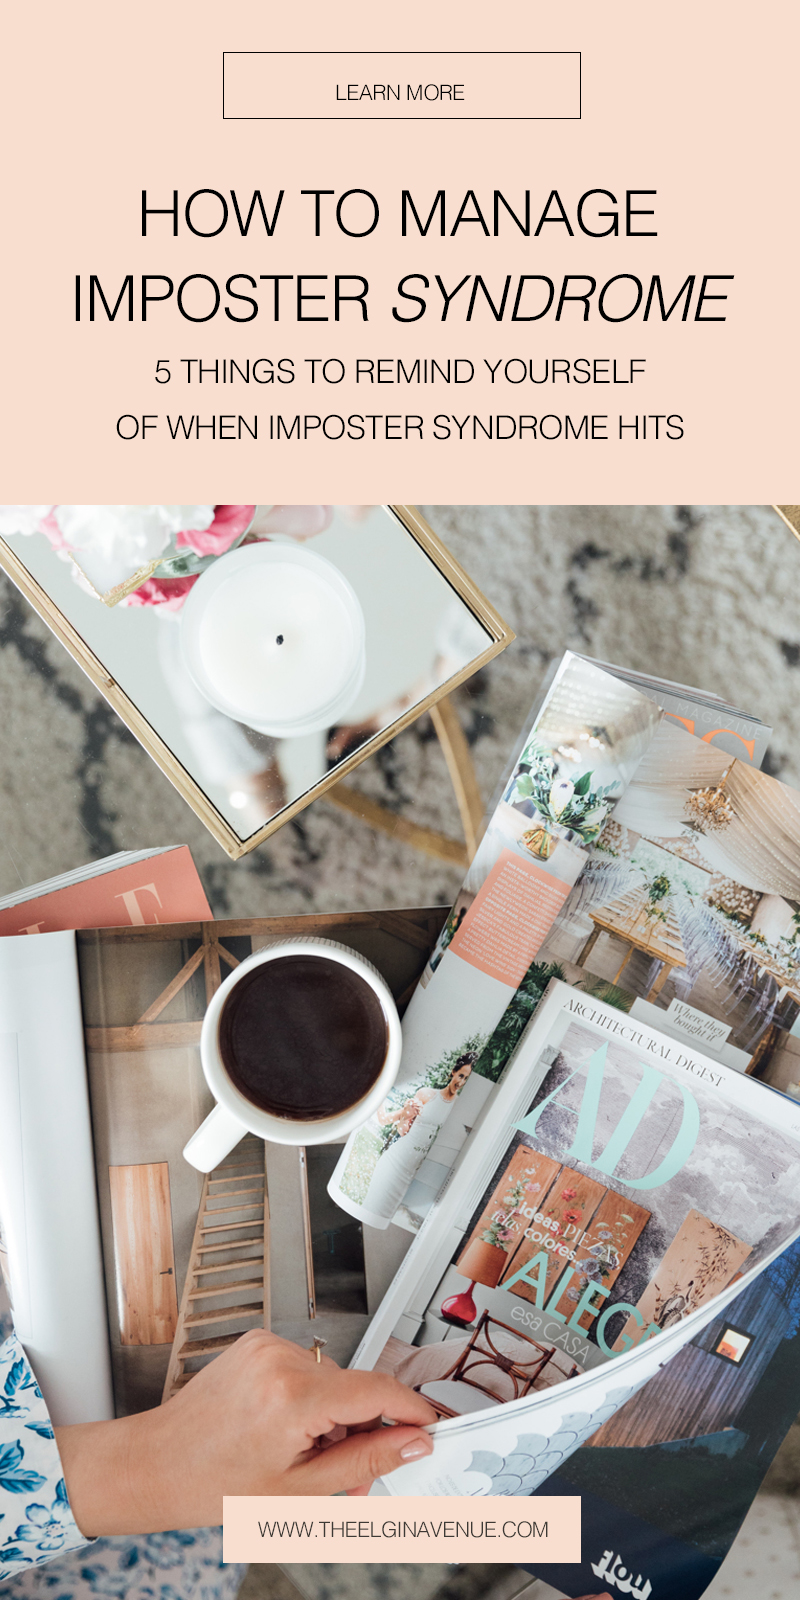 Imposter Syndrome - How To Handle It | The Elgin Avenue Blog